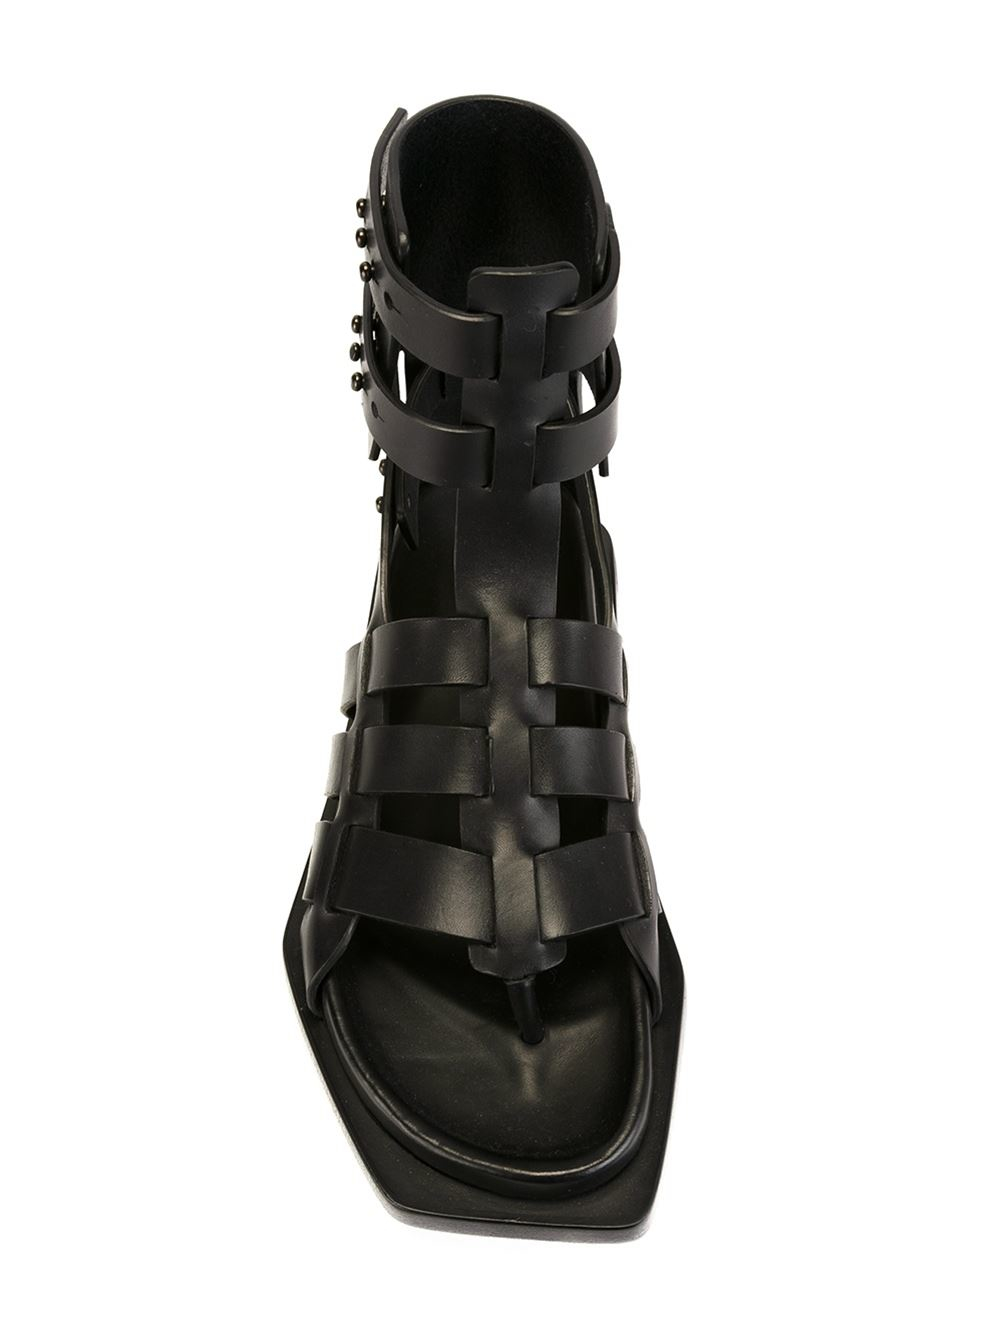 Lyst - Rick Owens Gladiator Sandals in Natural